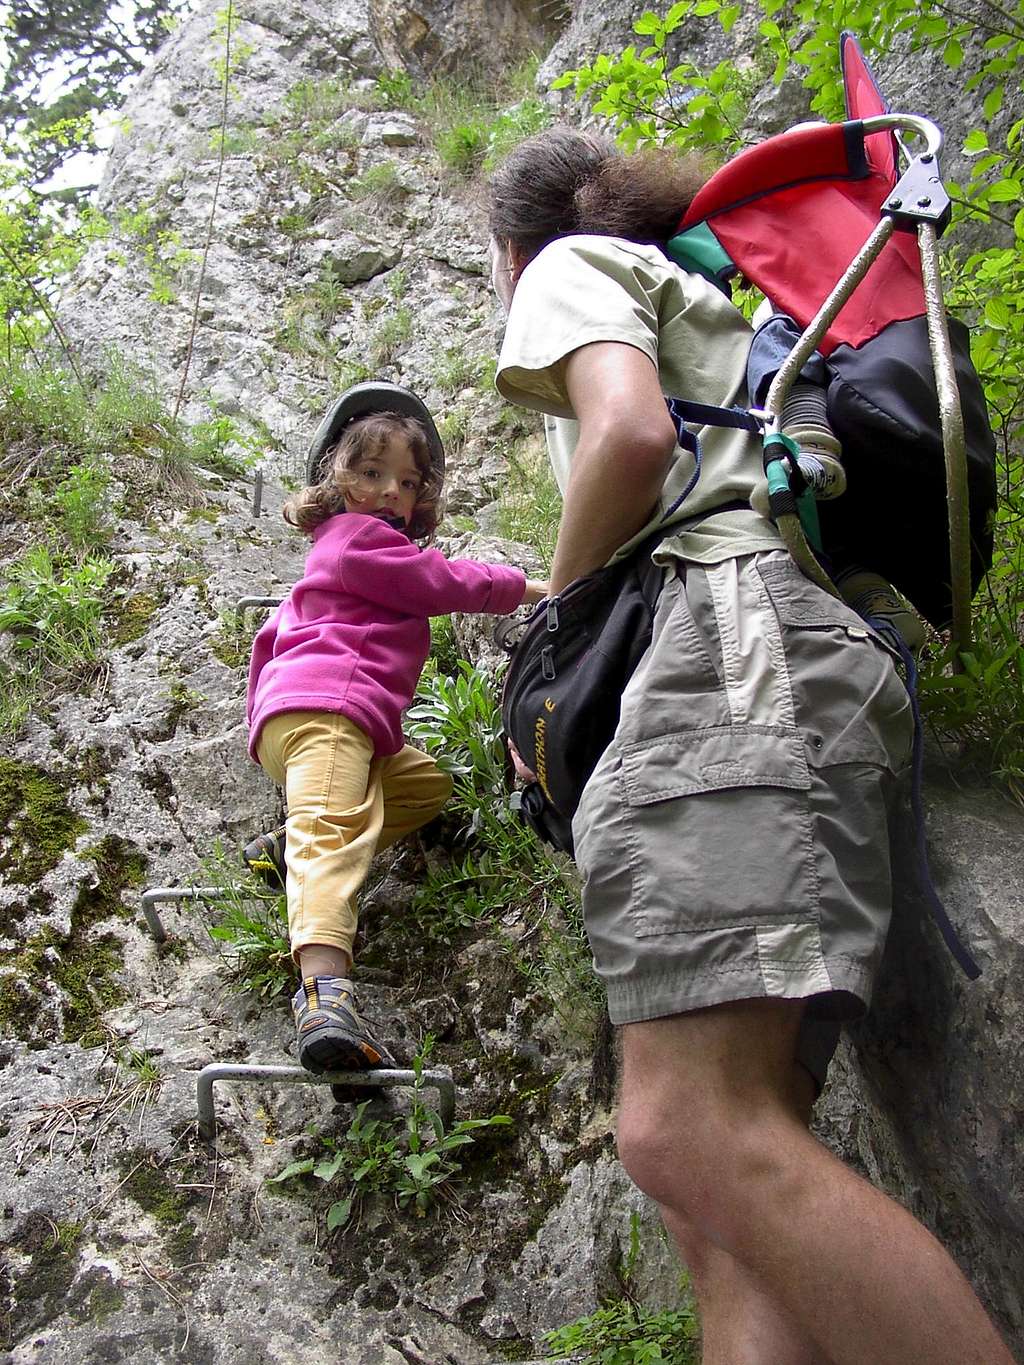 My daughter's first via ferrata experience